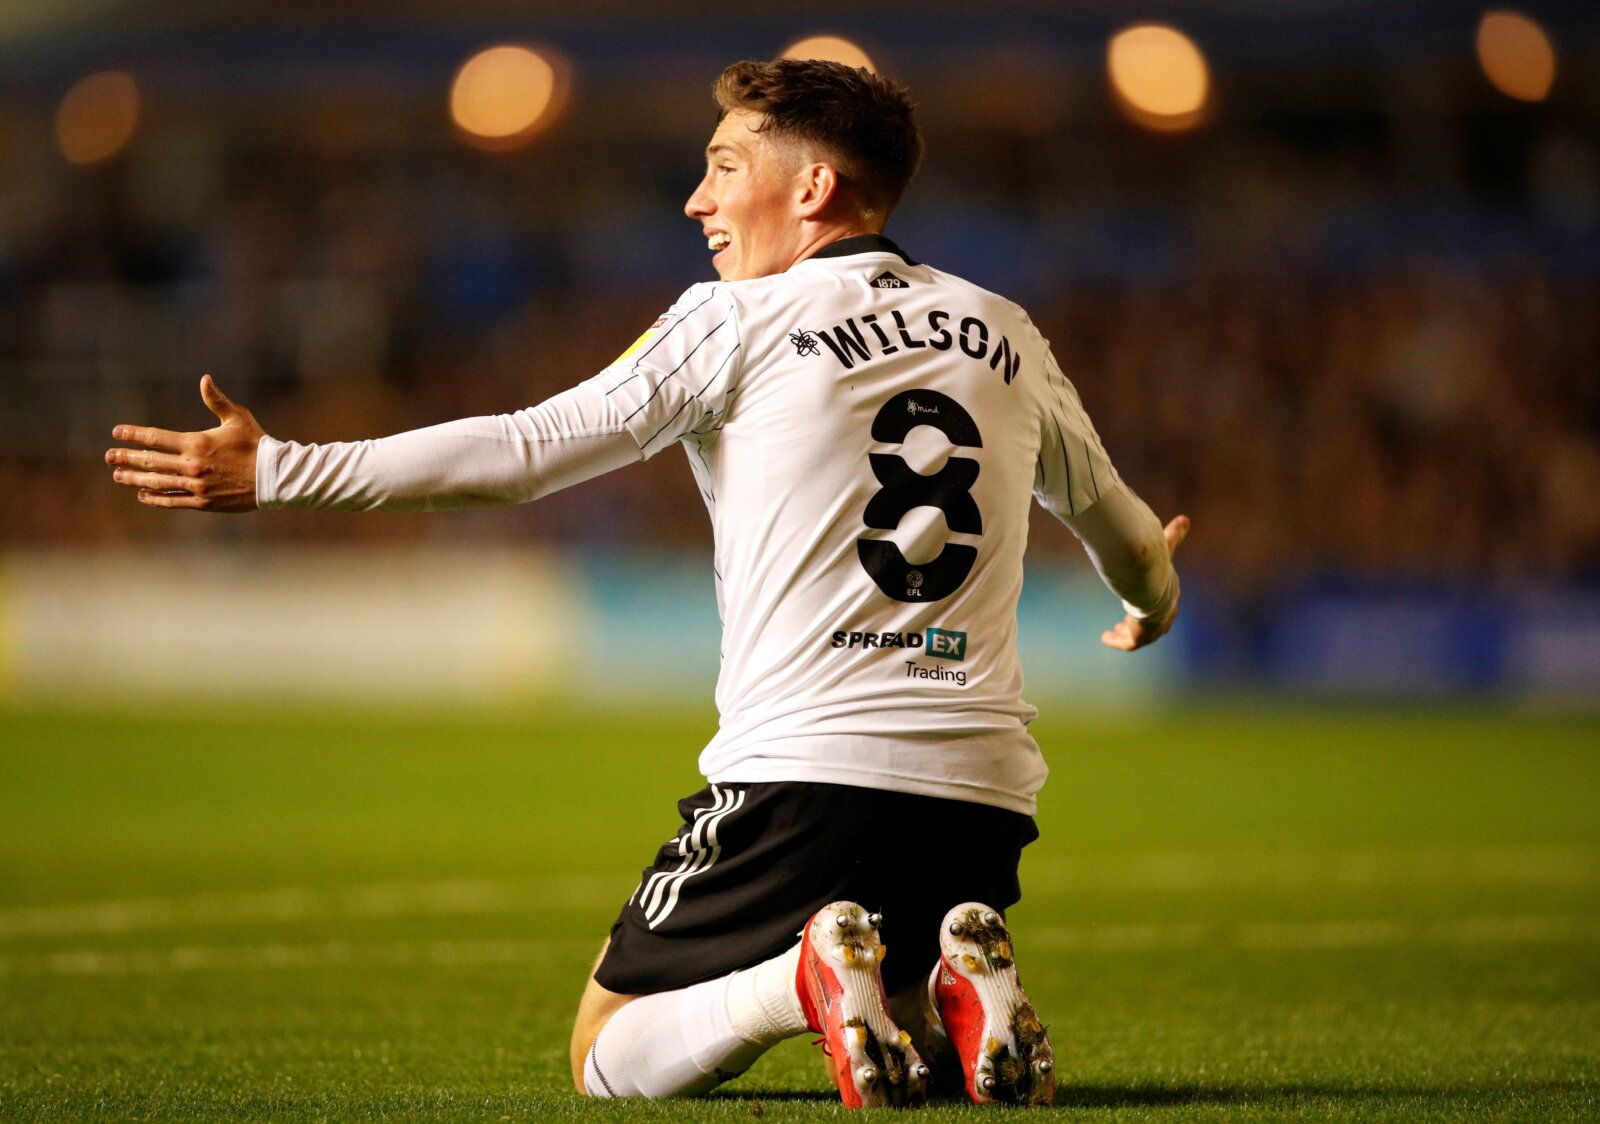 Harry Wilson at Fulham: How&#39;s it gone so far? What issues does he face? What&#39;s next? | Football League World